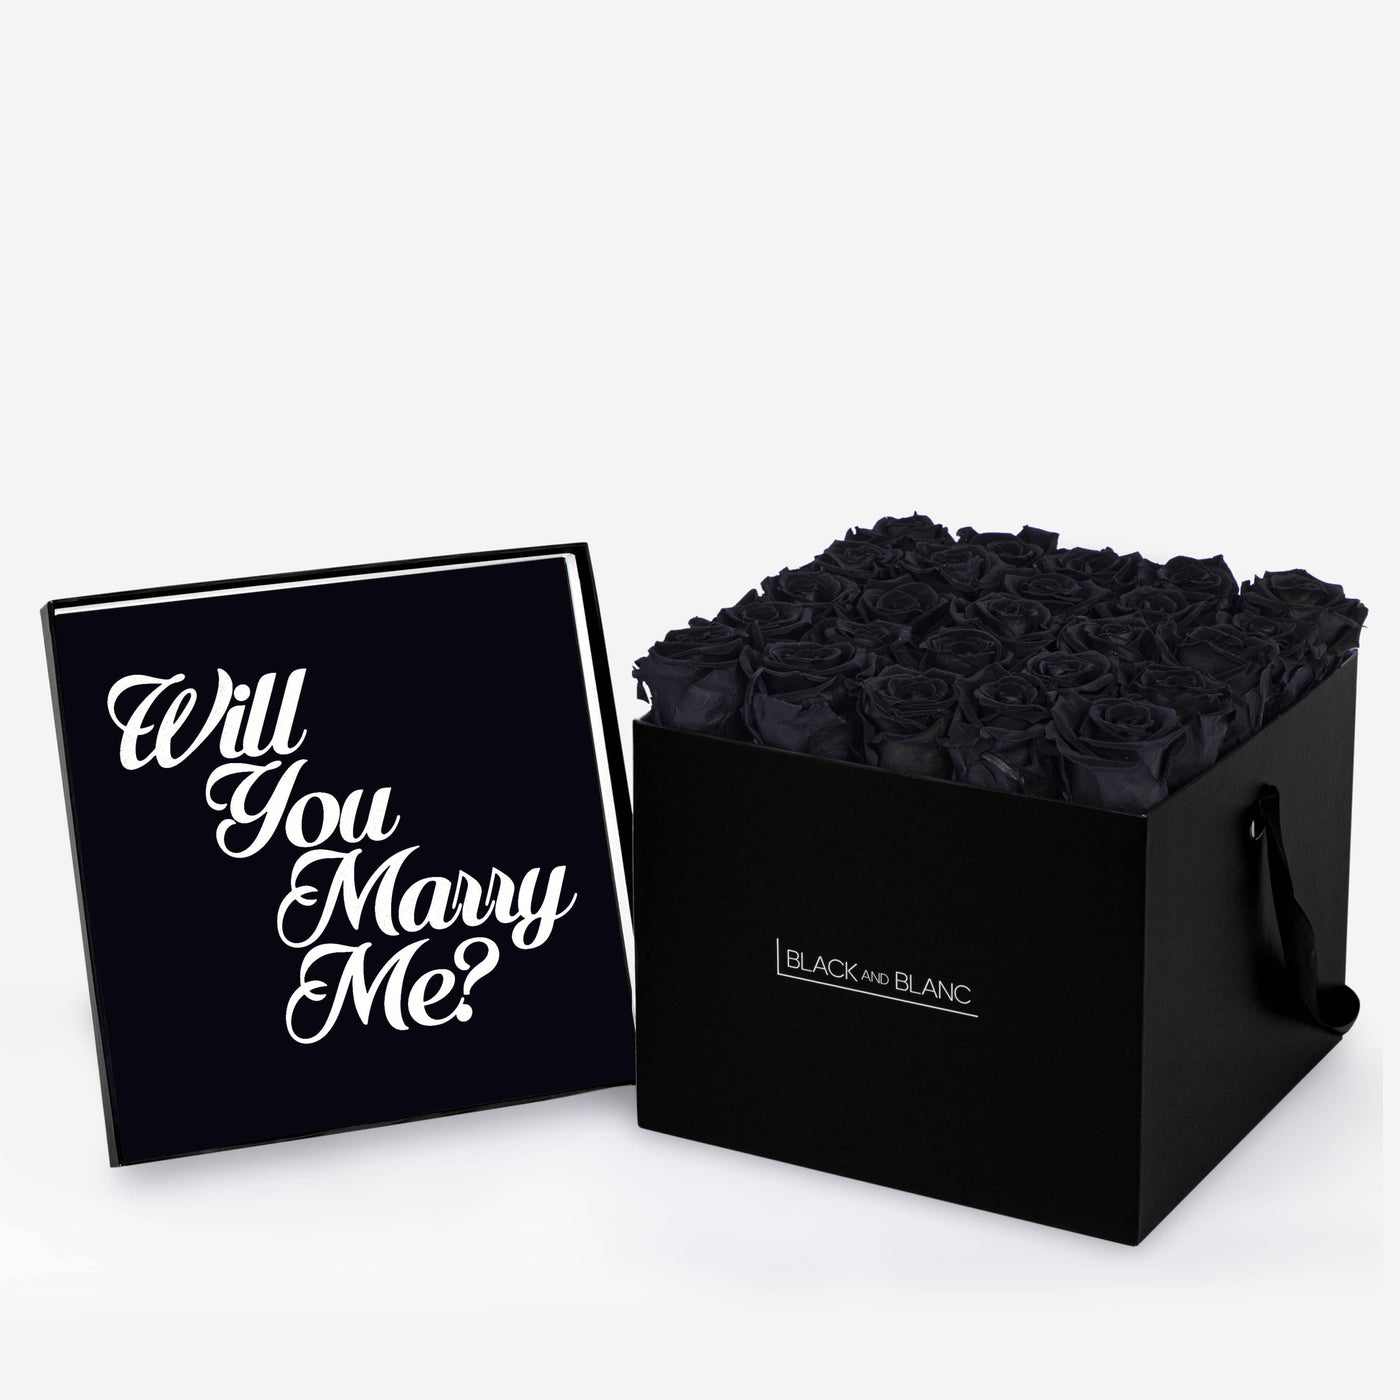 Infinity Texte de Fleur - Will You Marry Me? - BLACK AND BLANC